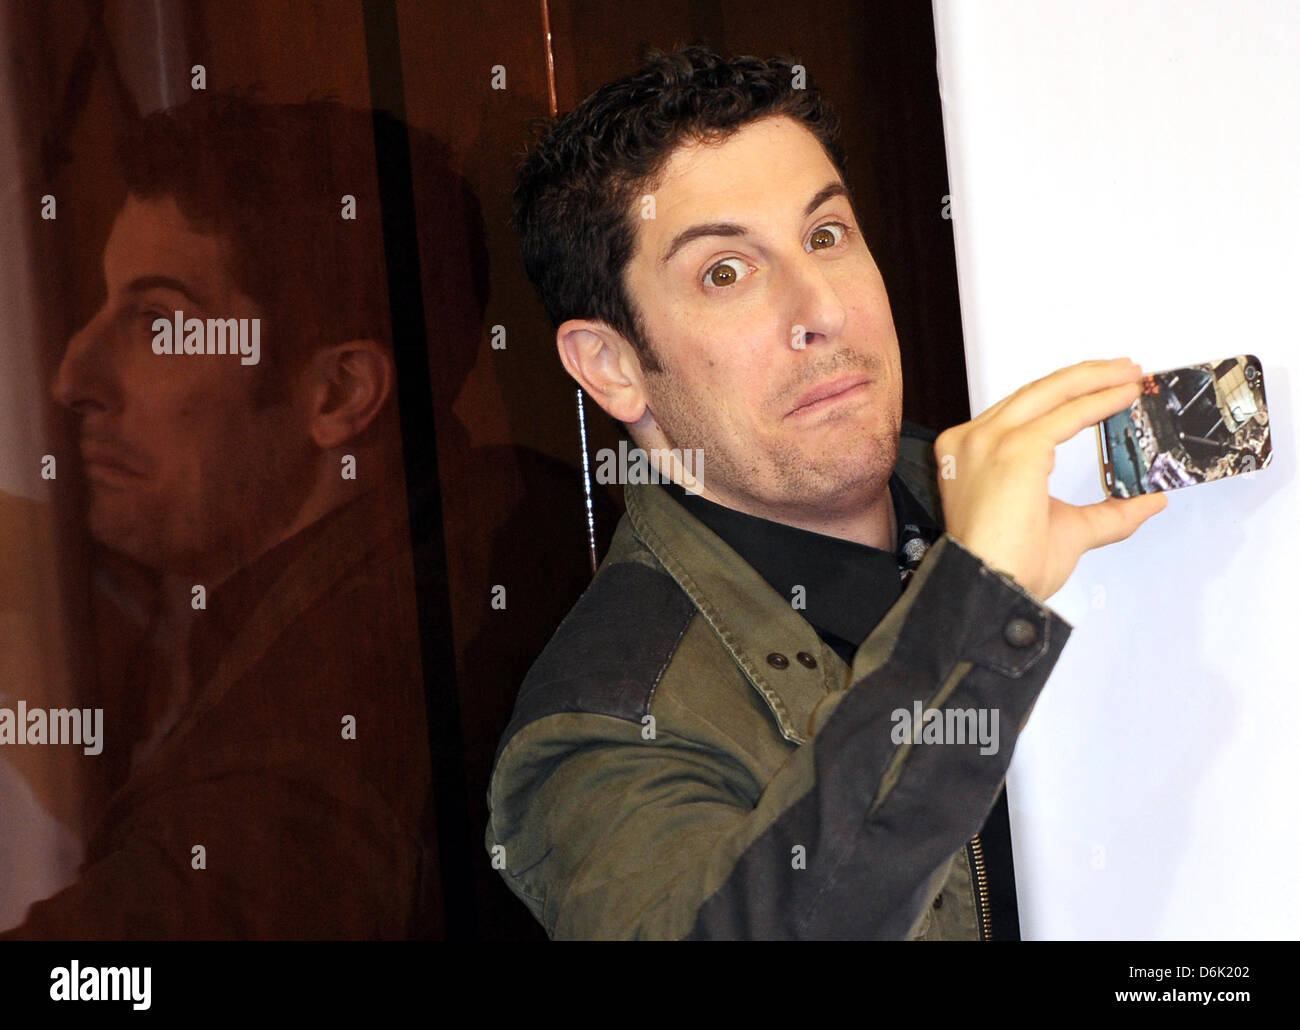 US American actor Jason Biggs poses during the presentation of the movie 'American Pie - Reunion' in Berlin, Germany, 29 March 2012. The movie starts showing in German cinemas on 26 April 2012. Photo: JENS KALAENE Stock Photo